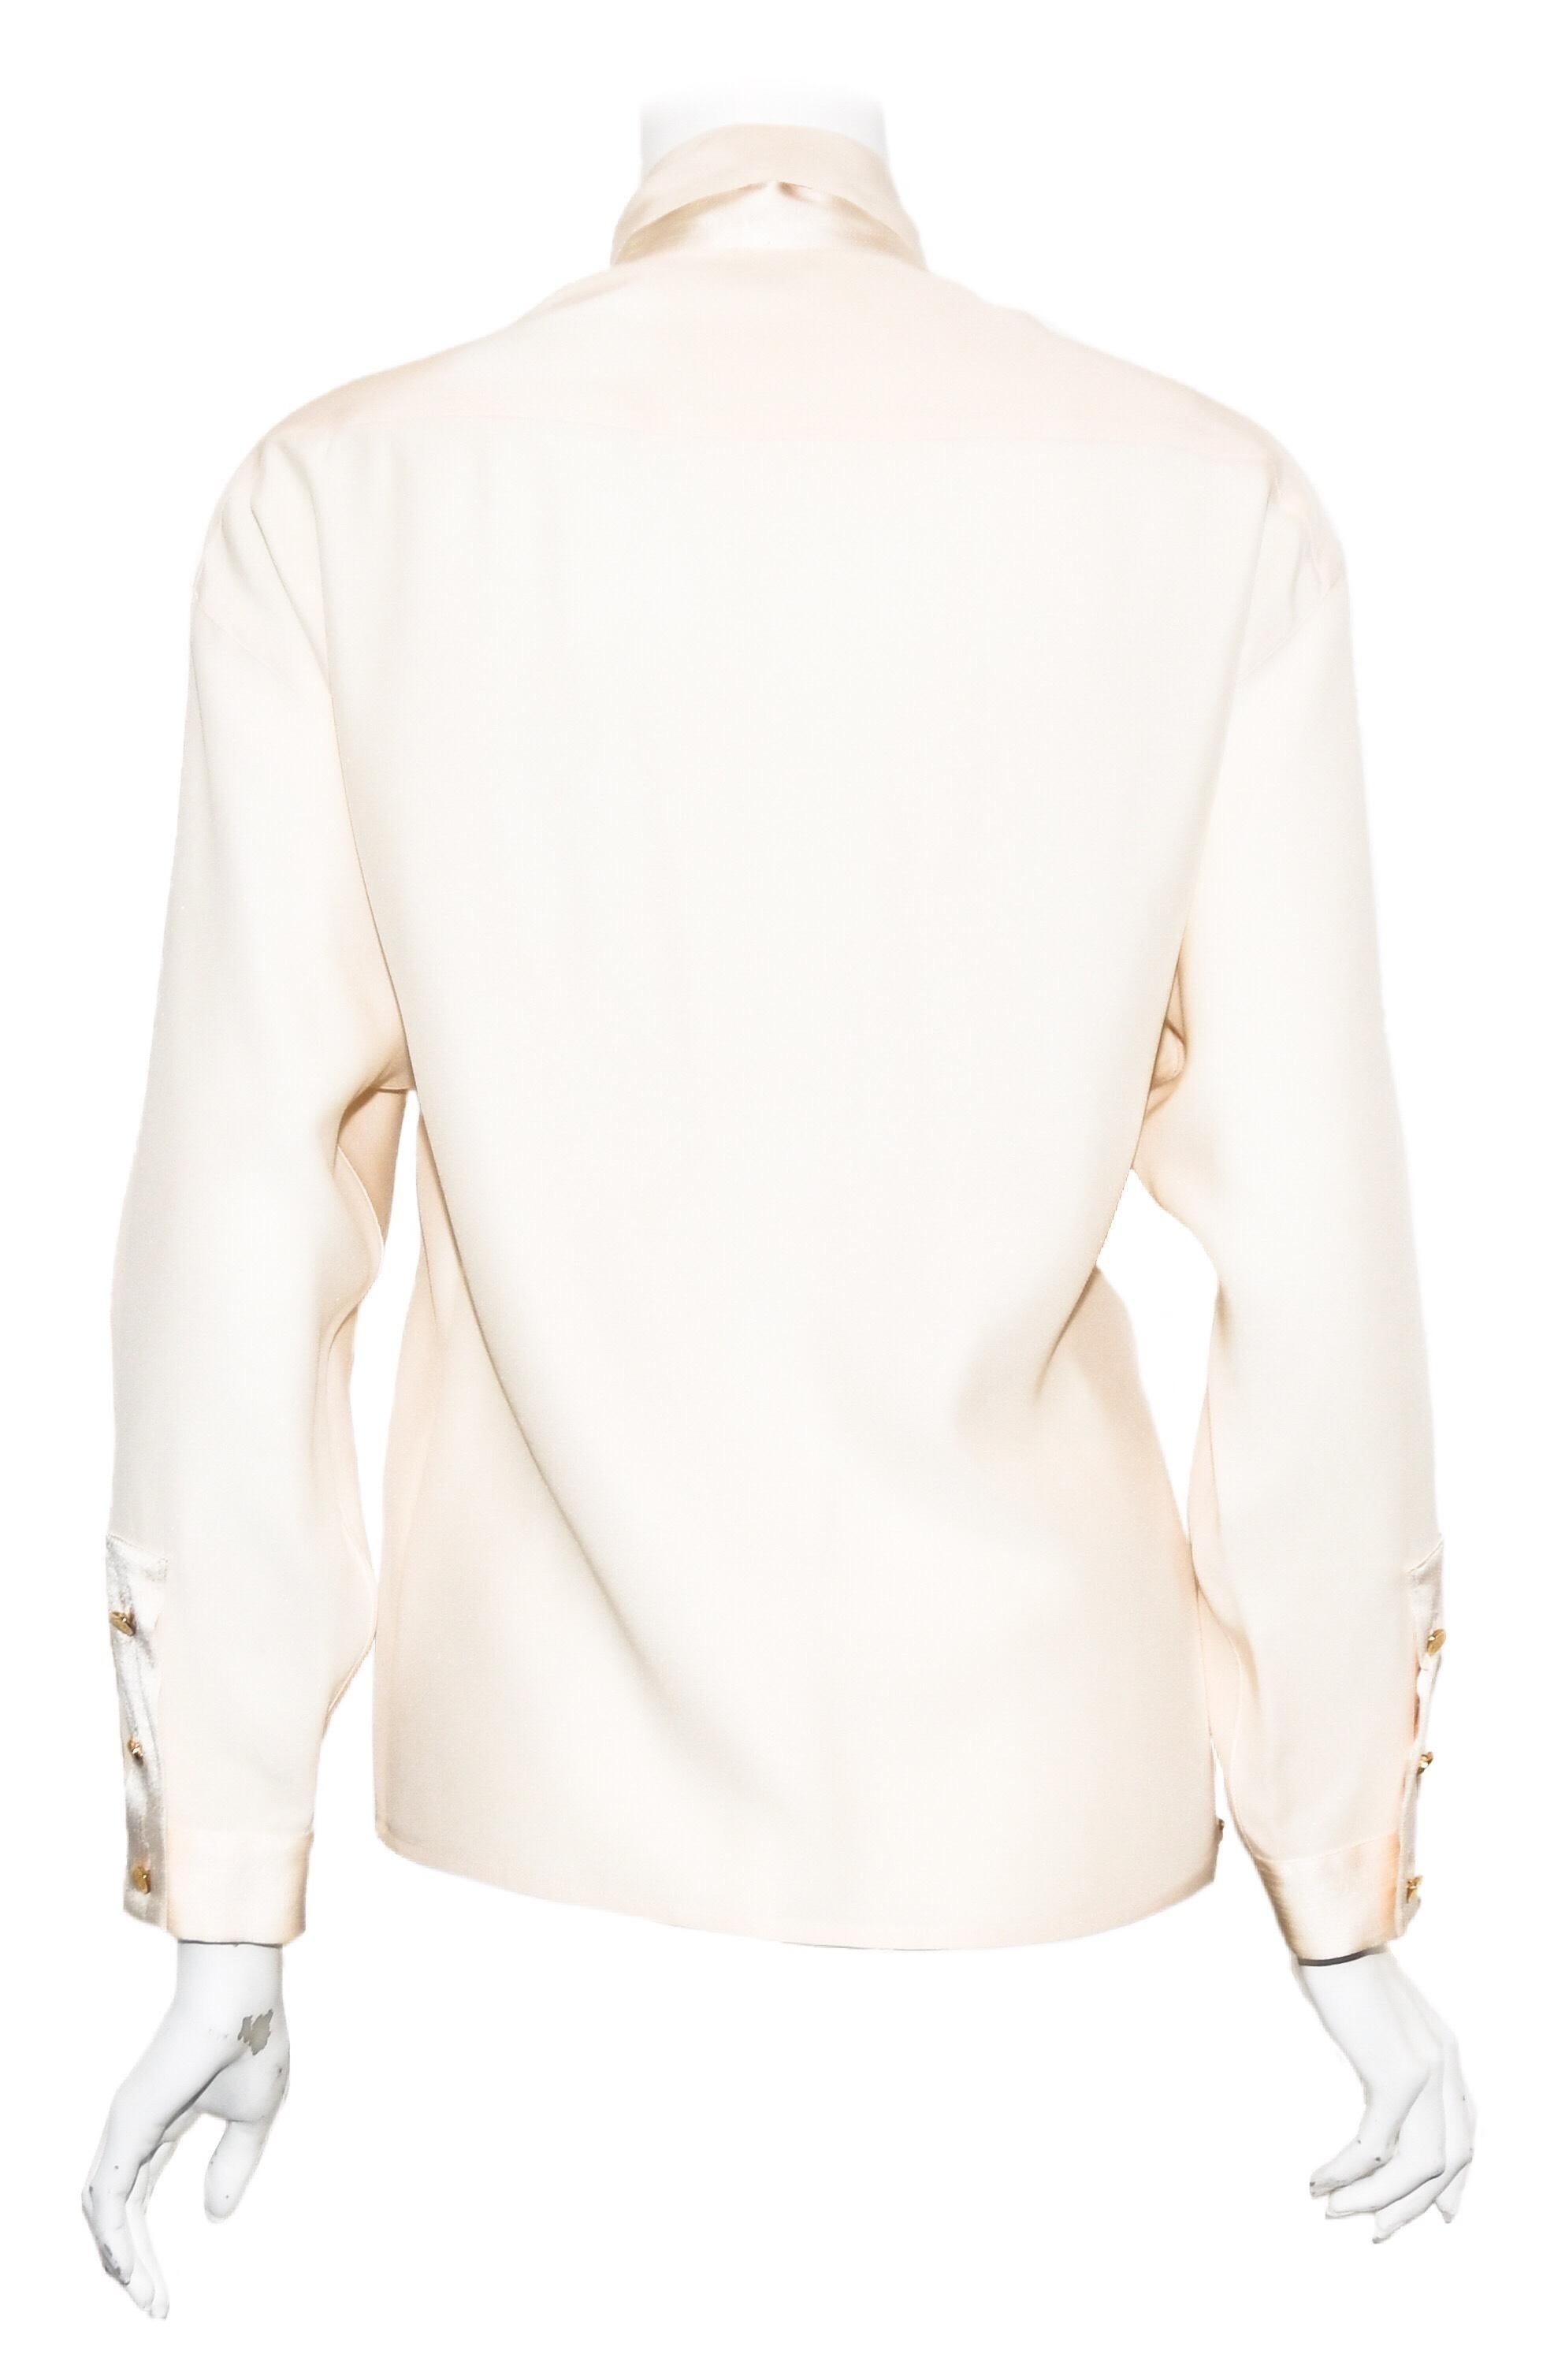 Beige Chanel Long Sleeve Blouse with Mandarin Collar Front Pockets